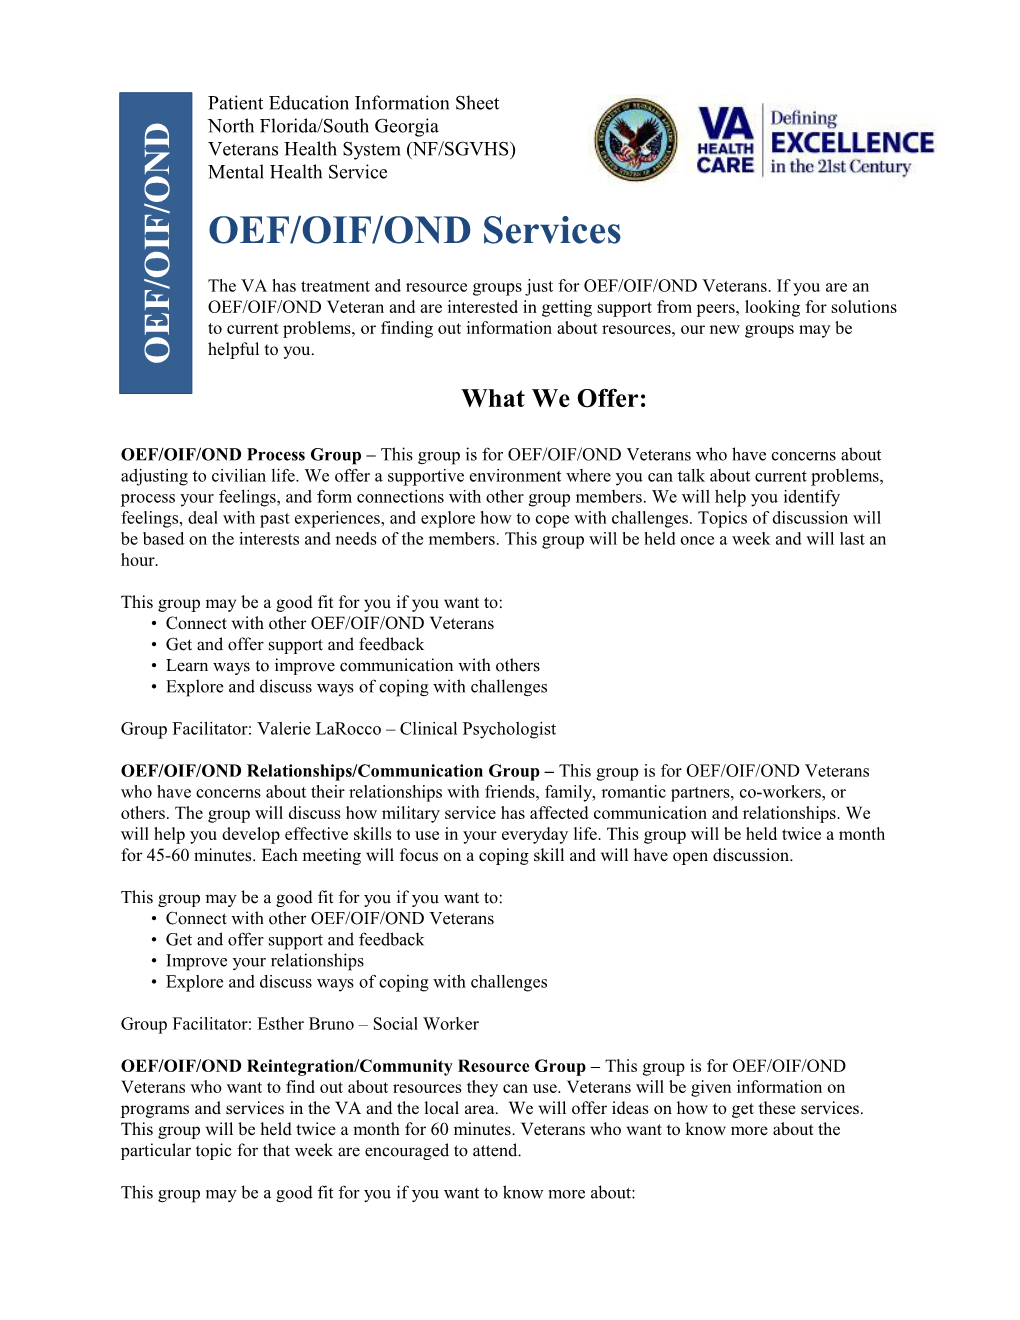 OEF/OIF/OND Services